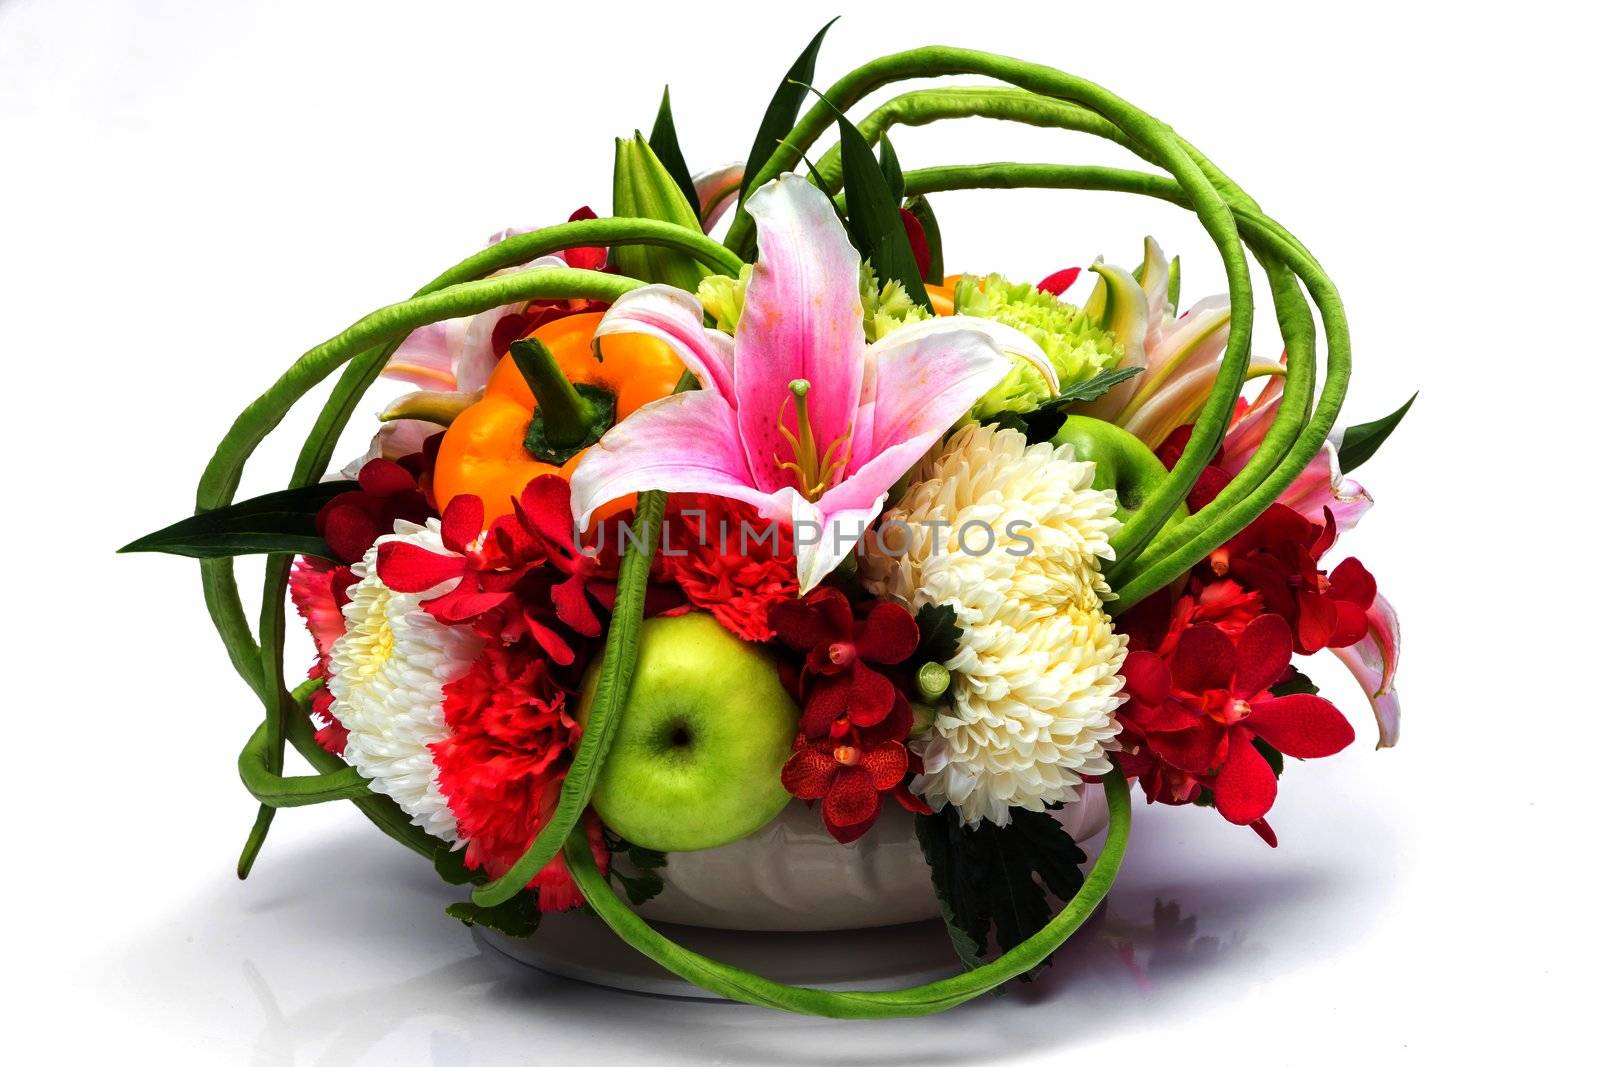 Bouquet of fruit and flower by smuay